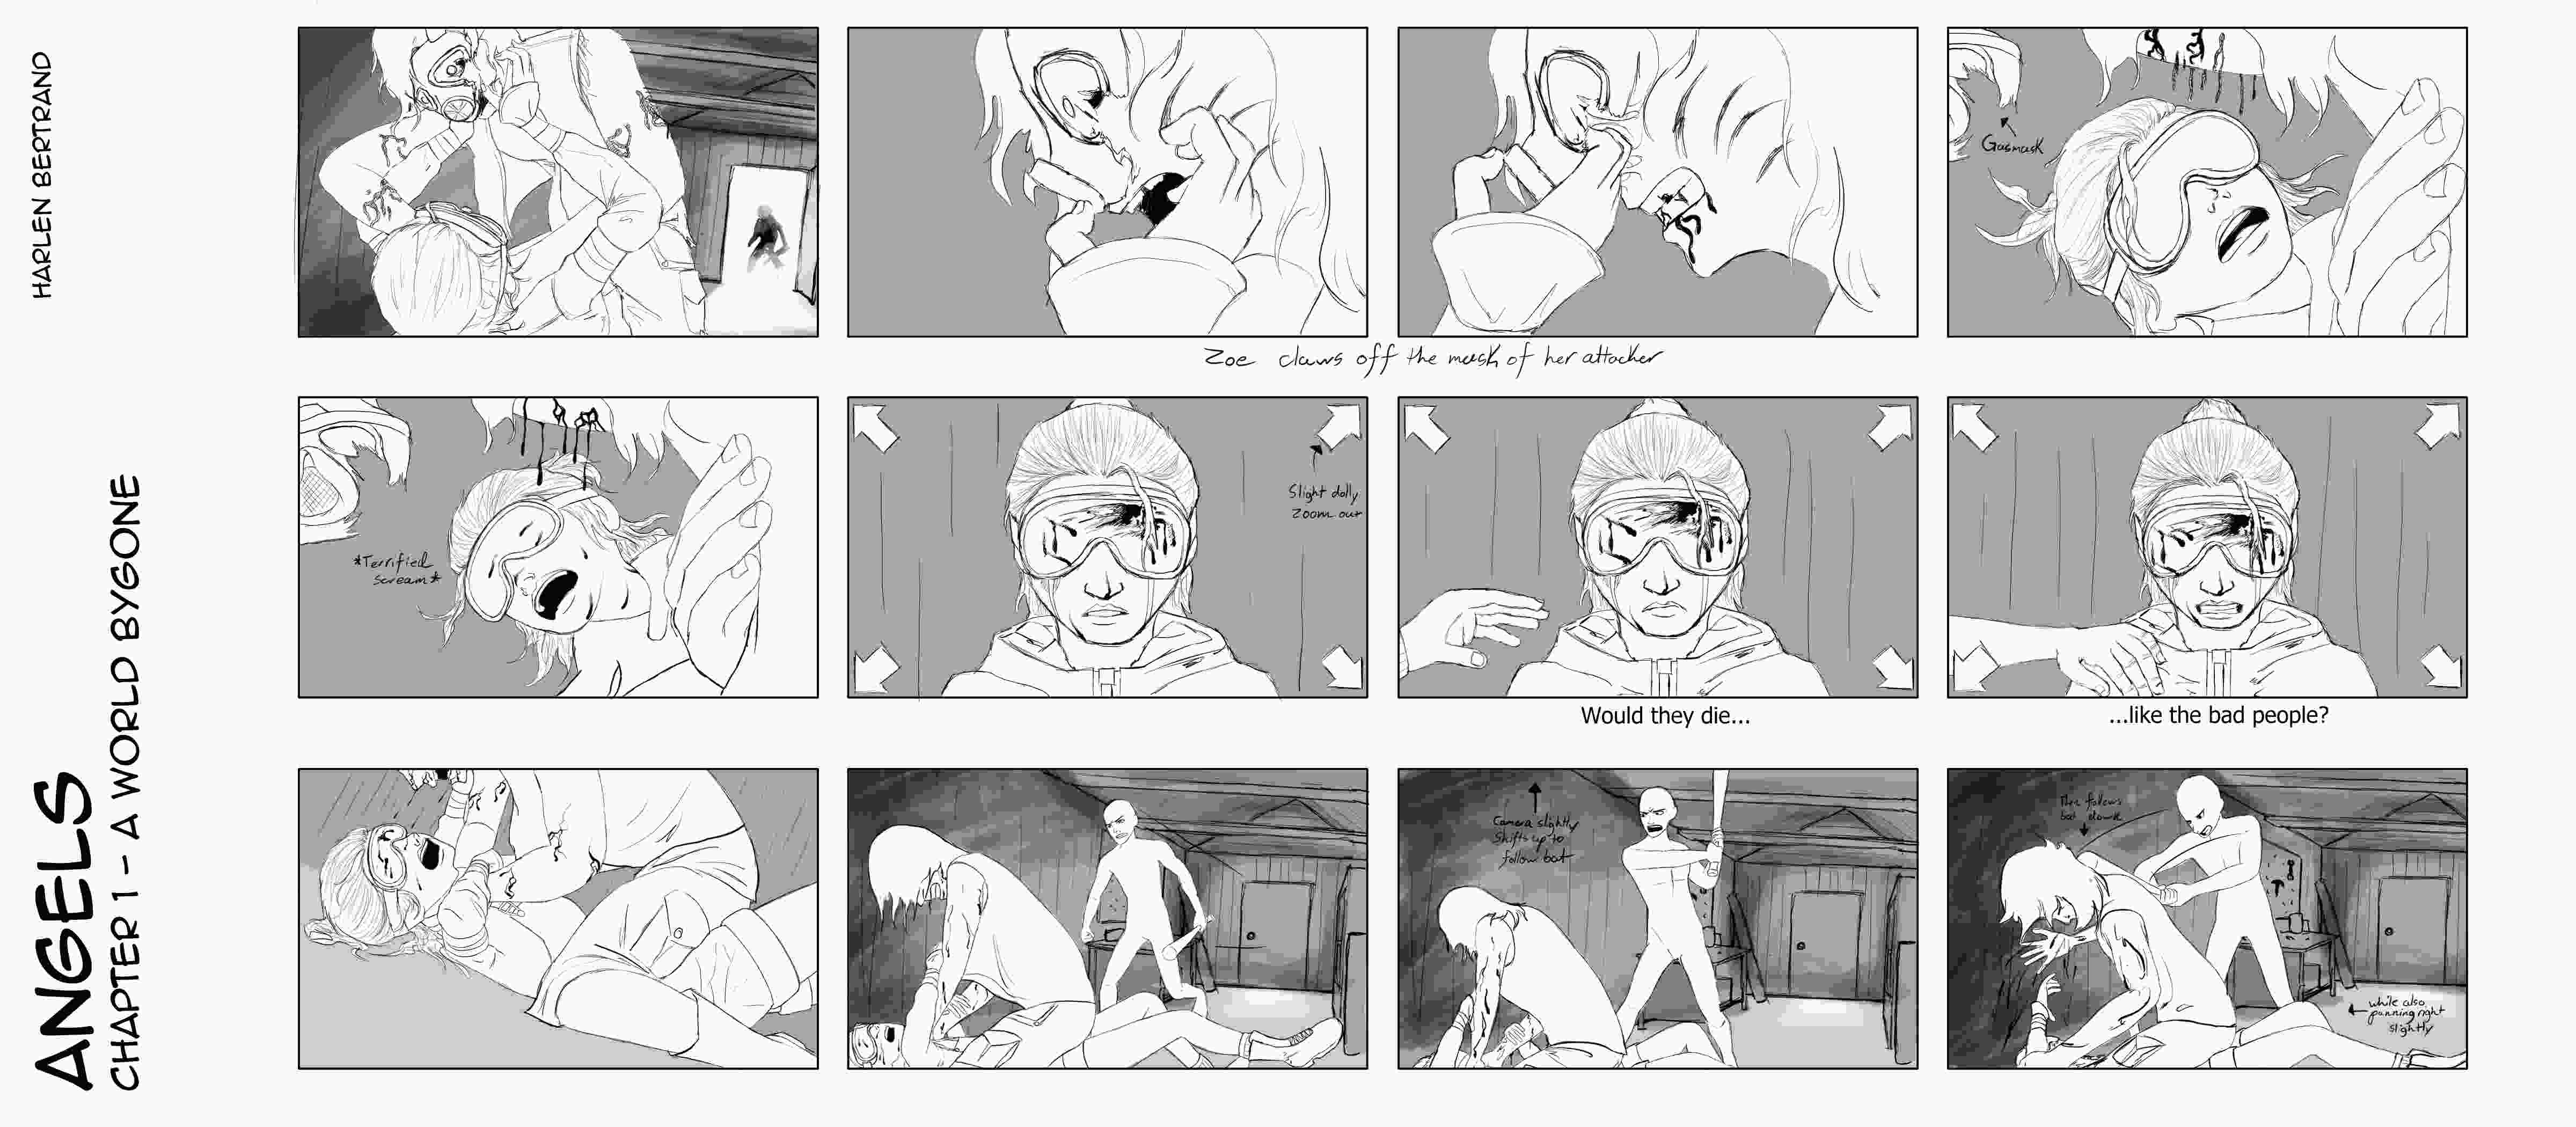 Page 3 of the Angels Storyboard